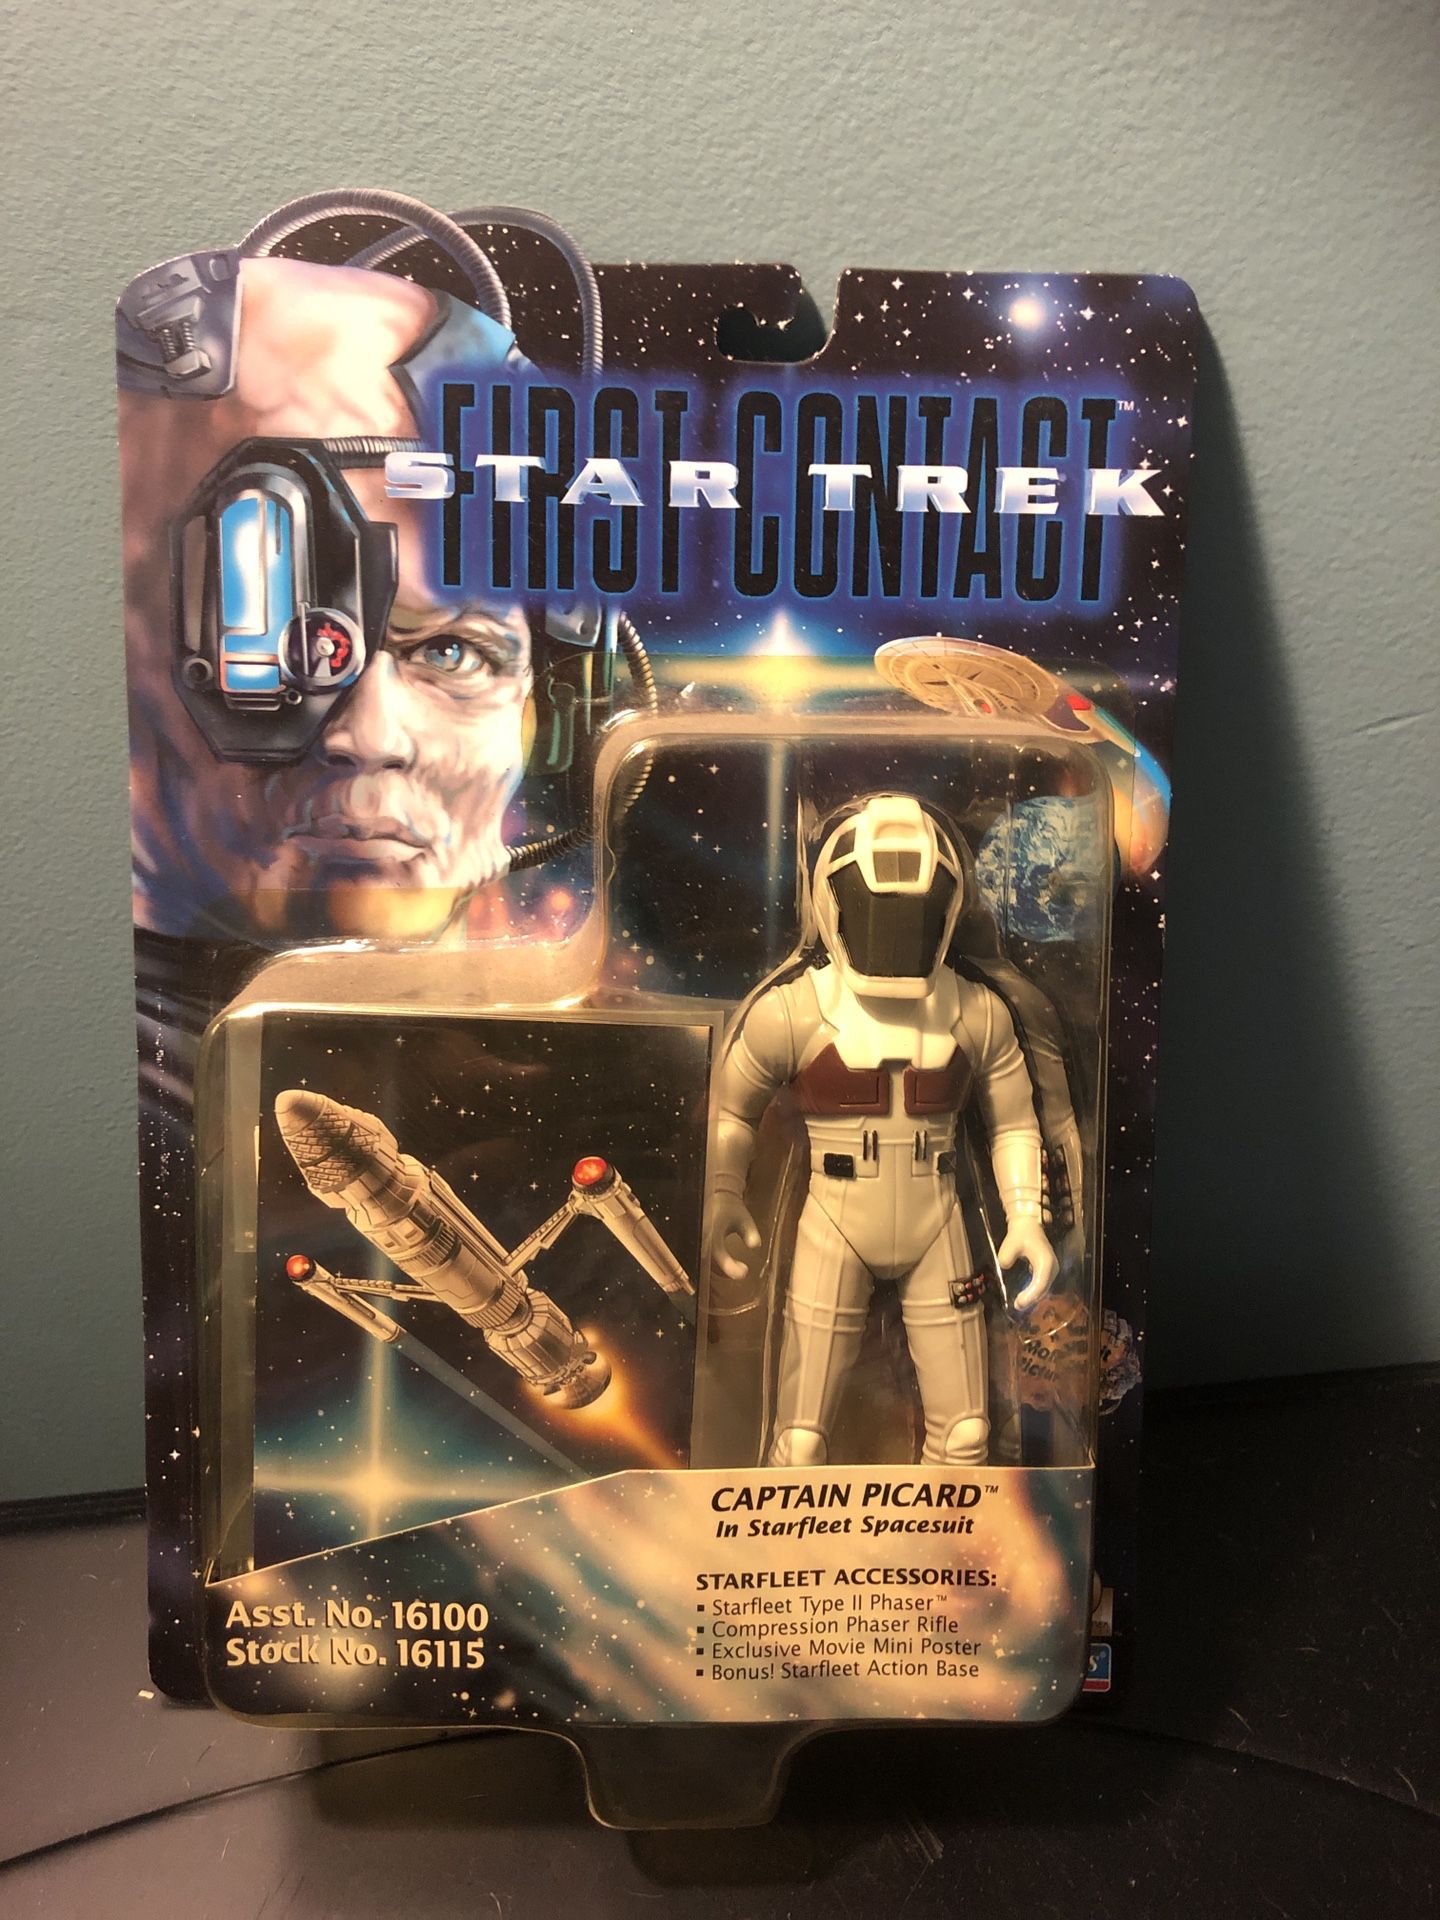 Star Trek First Contact Captain Picard action figure